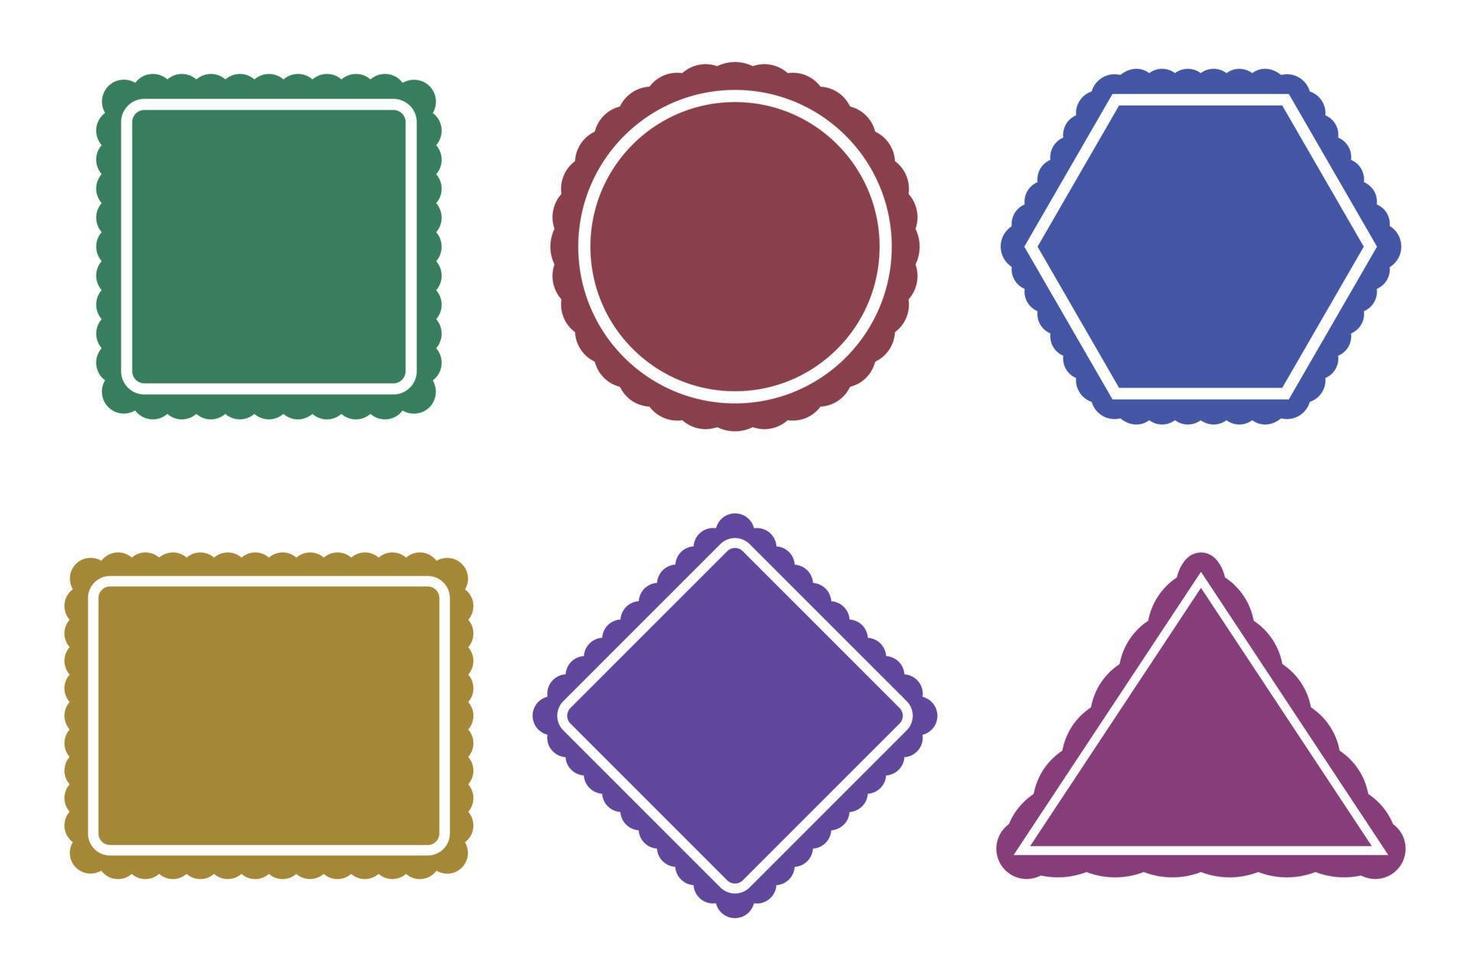 Muted Colour Stamps Banners vector